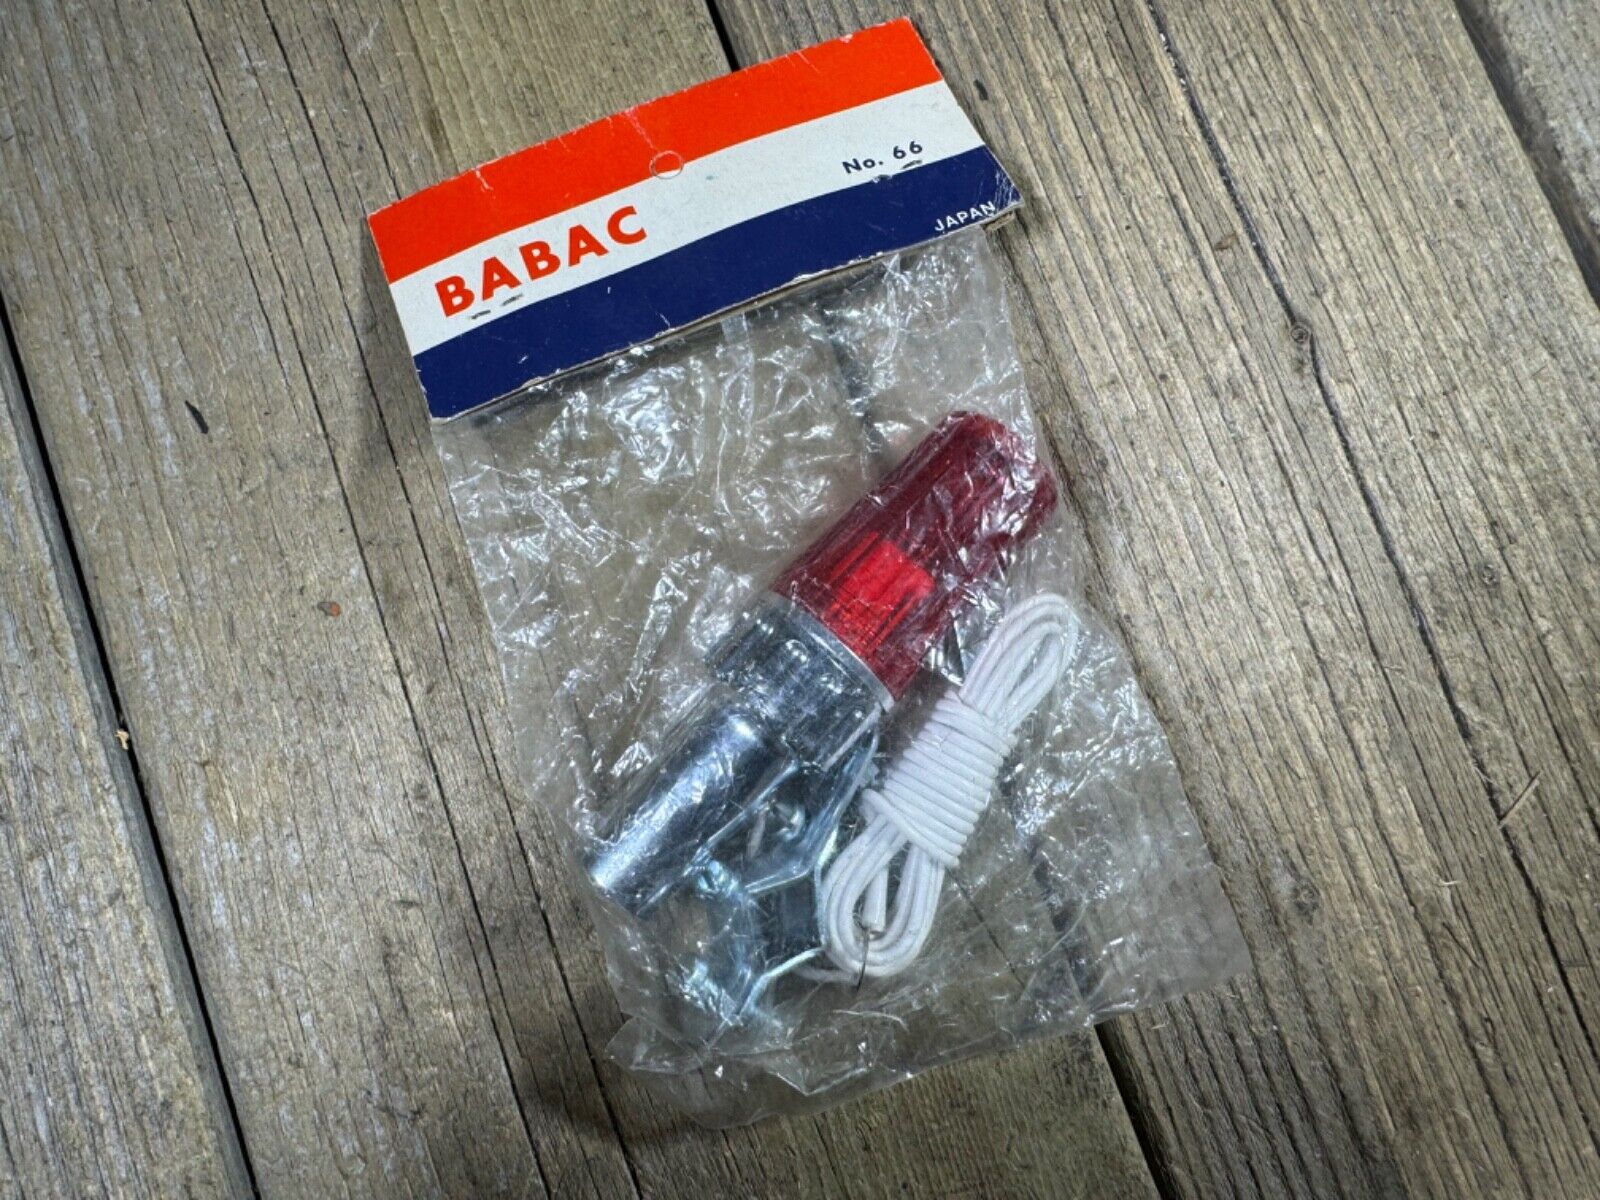 Babac No 66 Tail Light Vintage Bike Bicycle Rear Red Light Dynamo Battery NOS